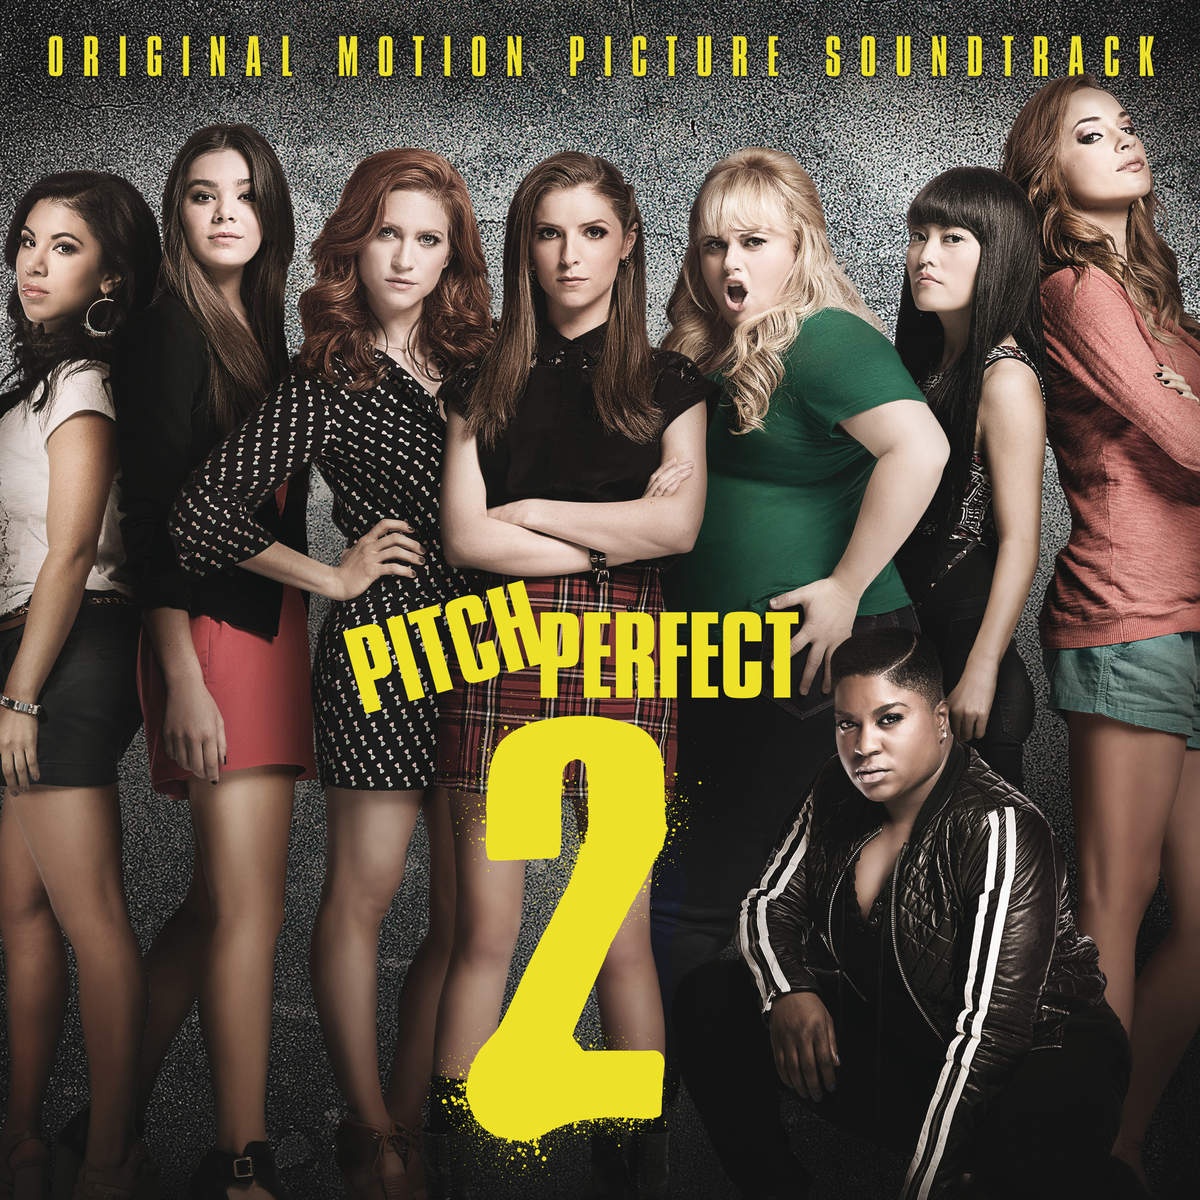 We Belong - From "Pitch Perfect 2" Soundtrack